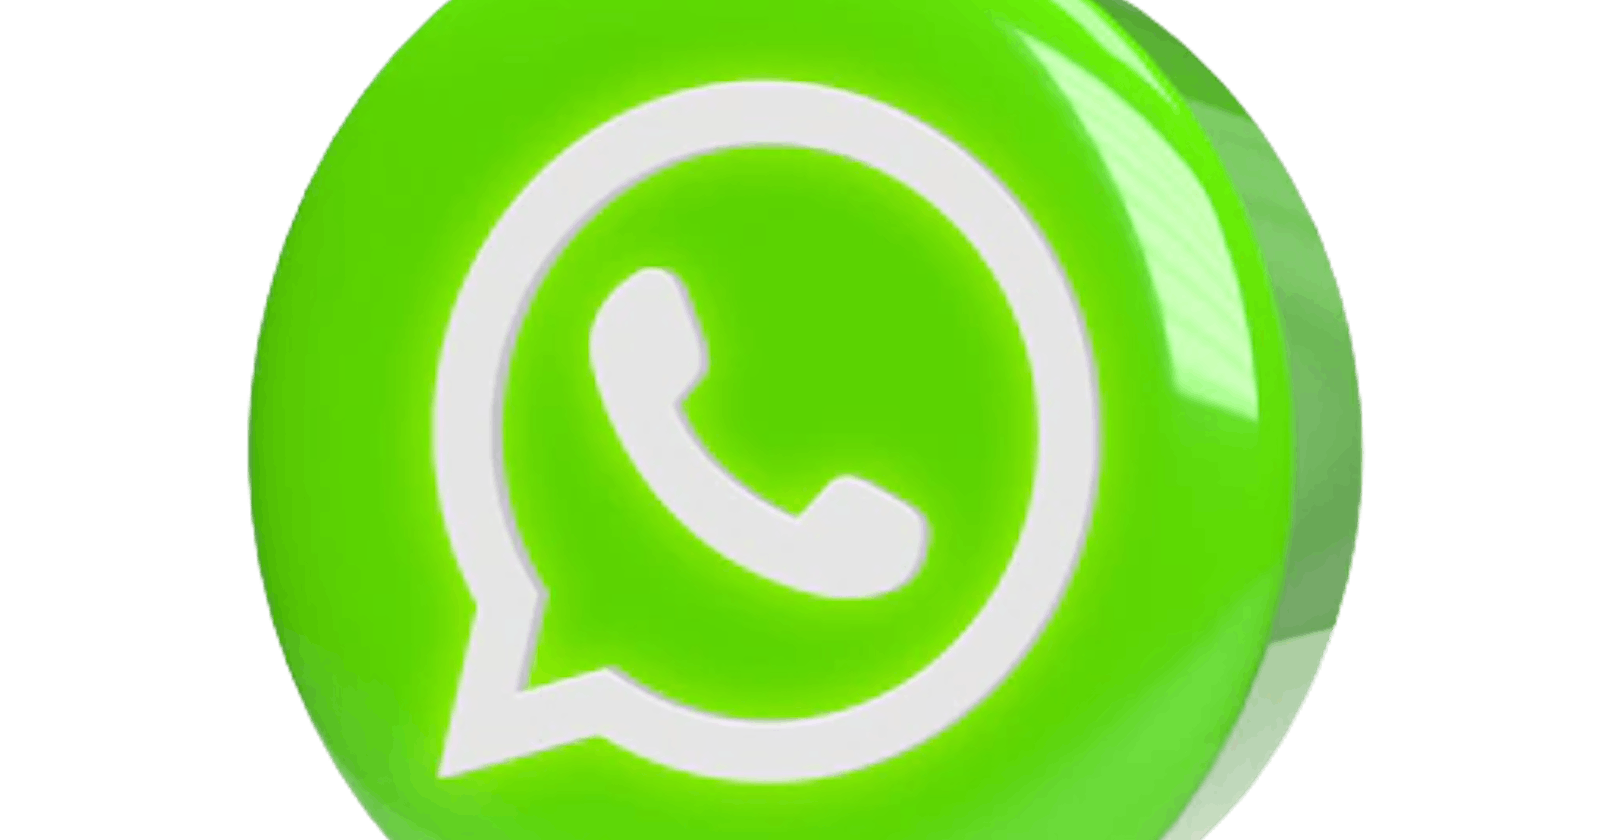 WhatsApp: how to protect your account to prevent your conversations from being spied on?